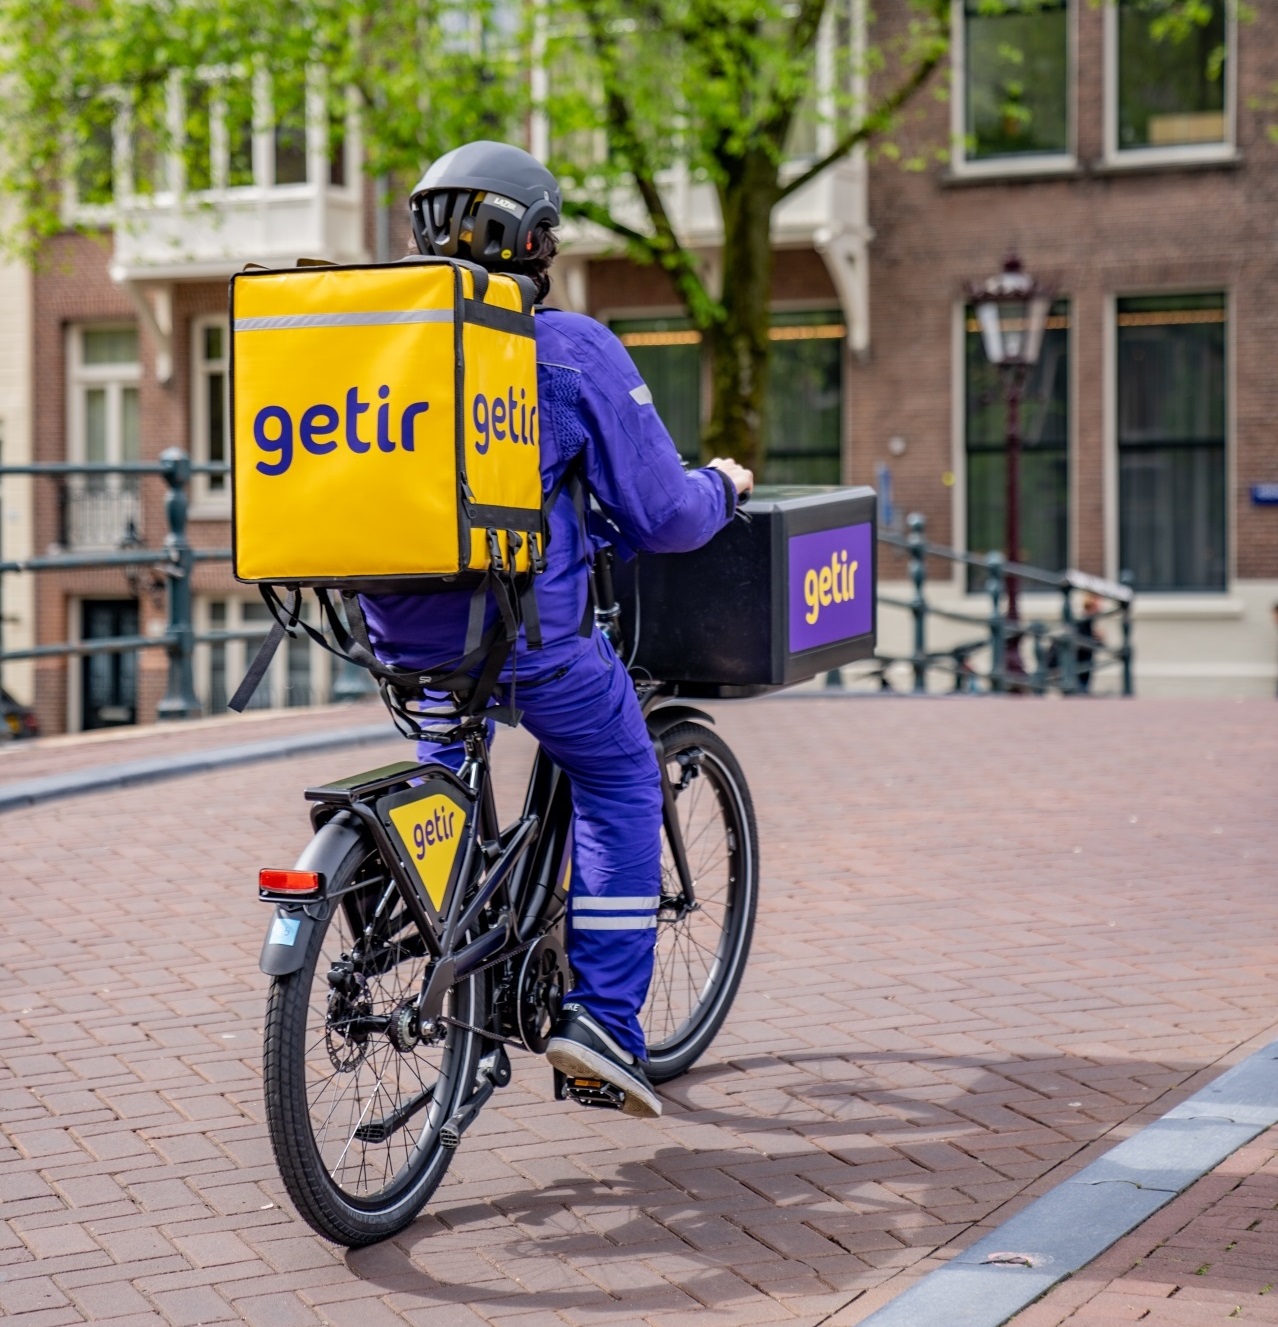 Getir's dismissal of 5 thousand couriers is on the agenda of the Netherlands